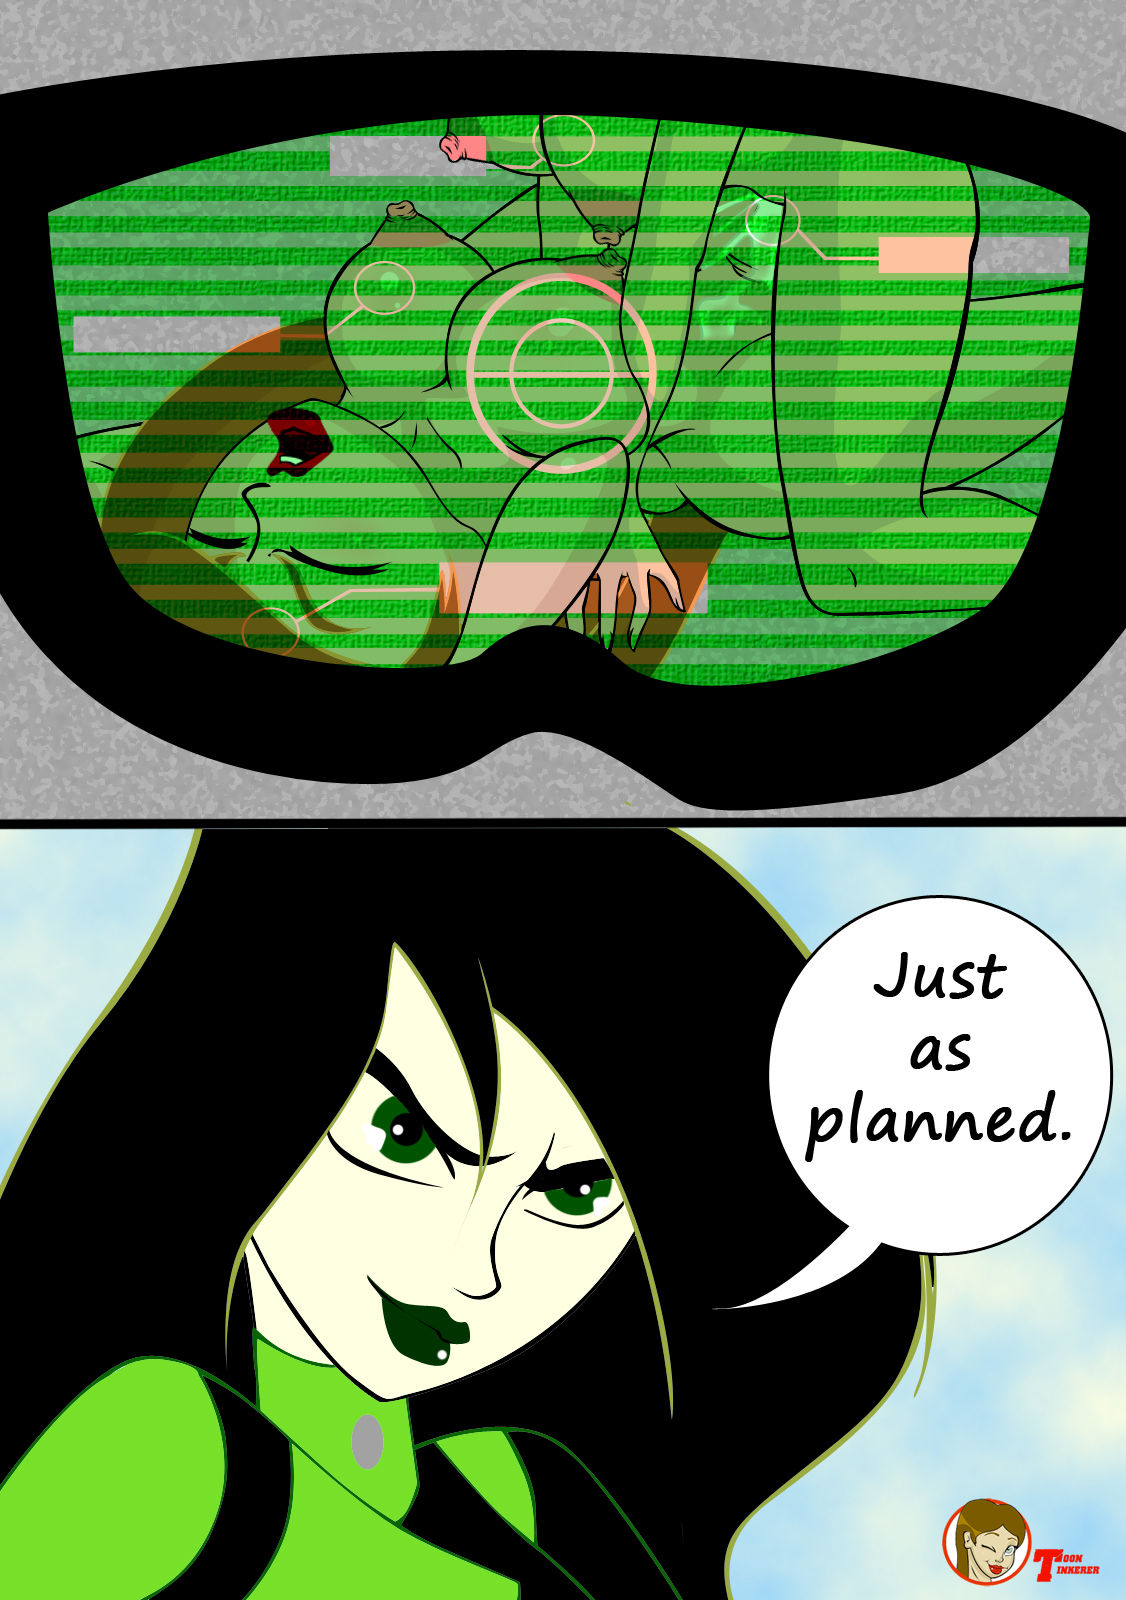 [Toontinkerer] Kim Plausible (Kim Possible) 